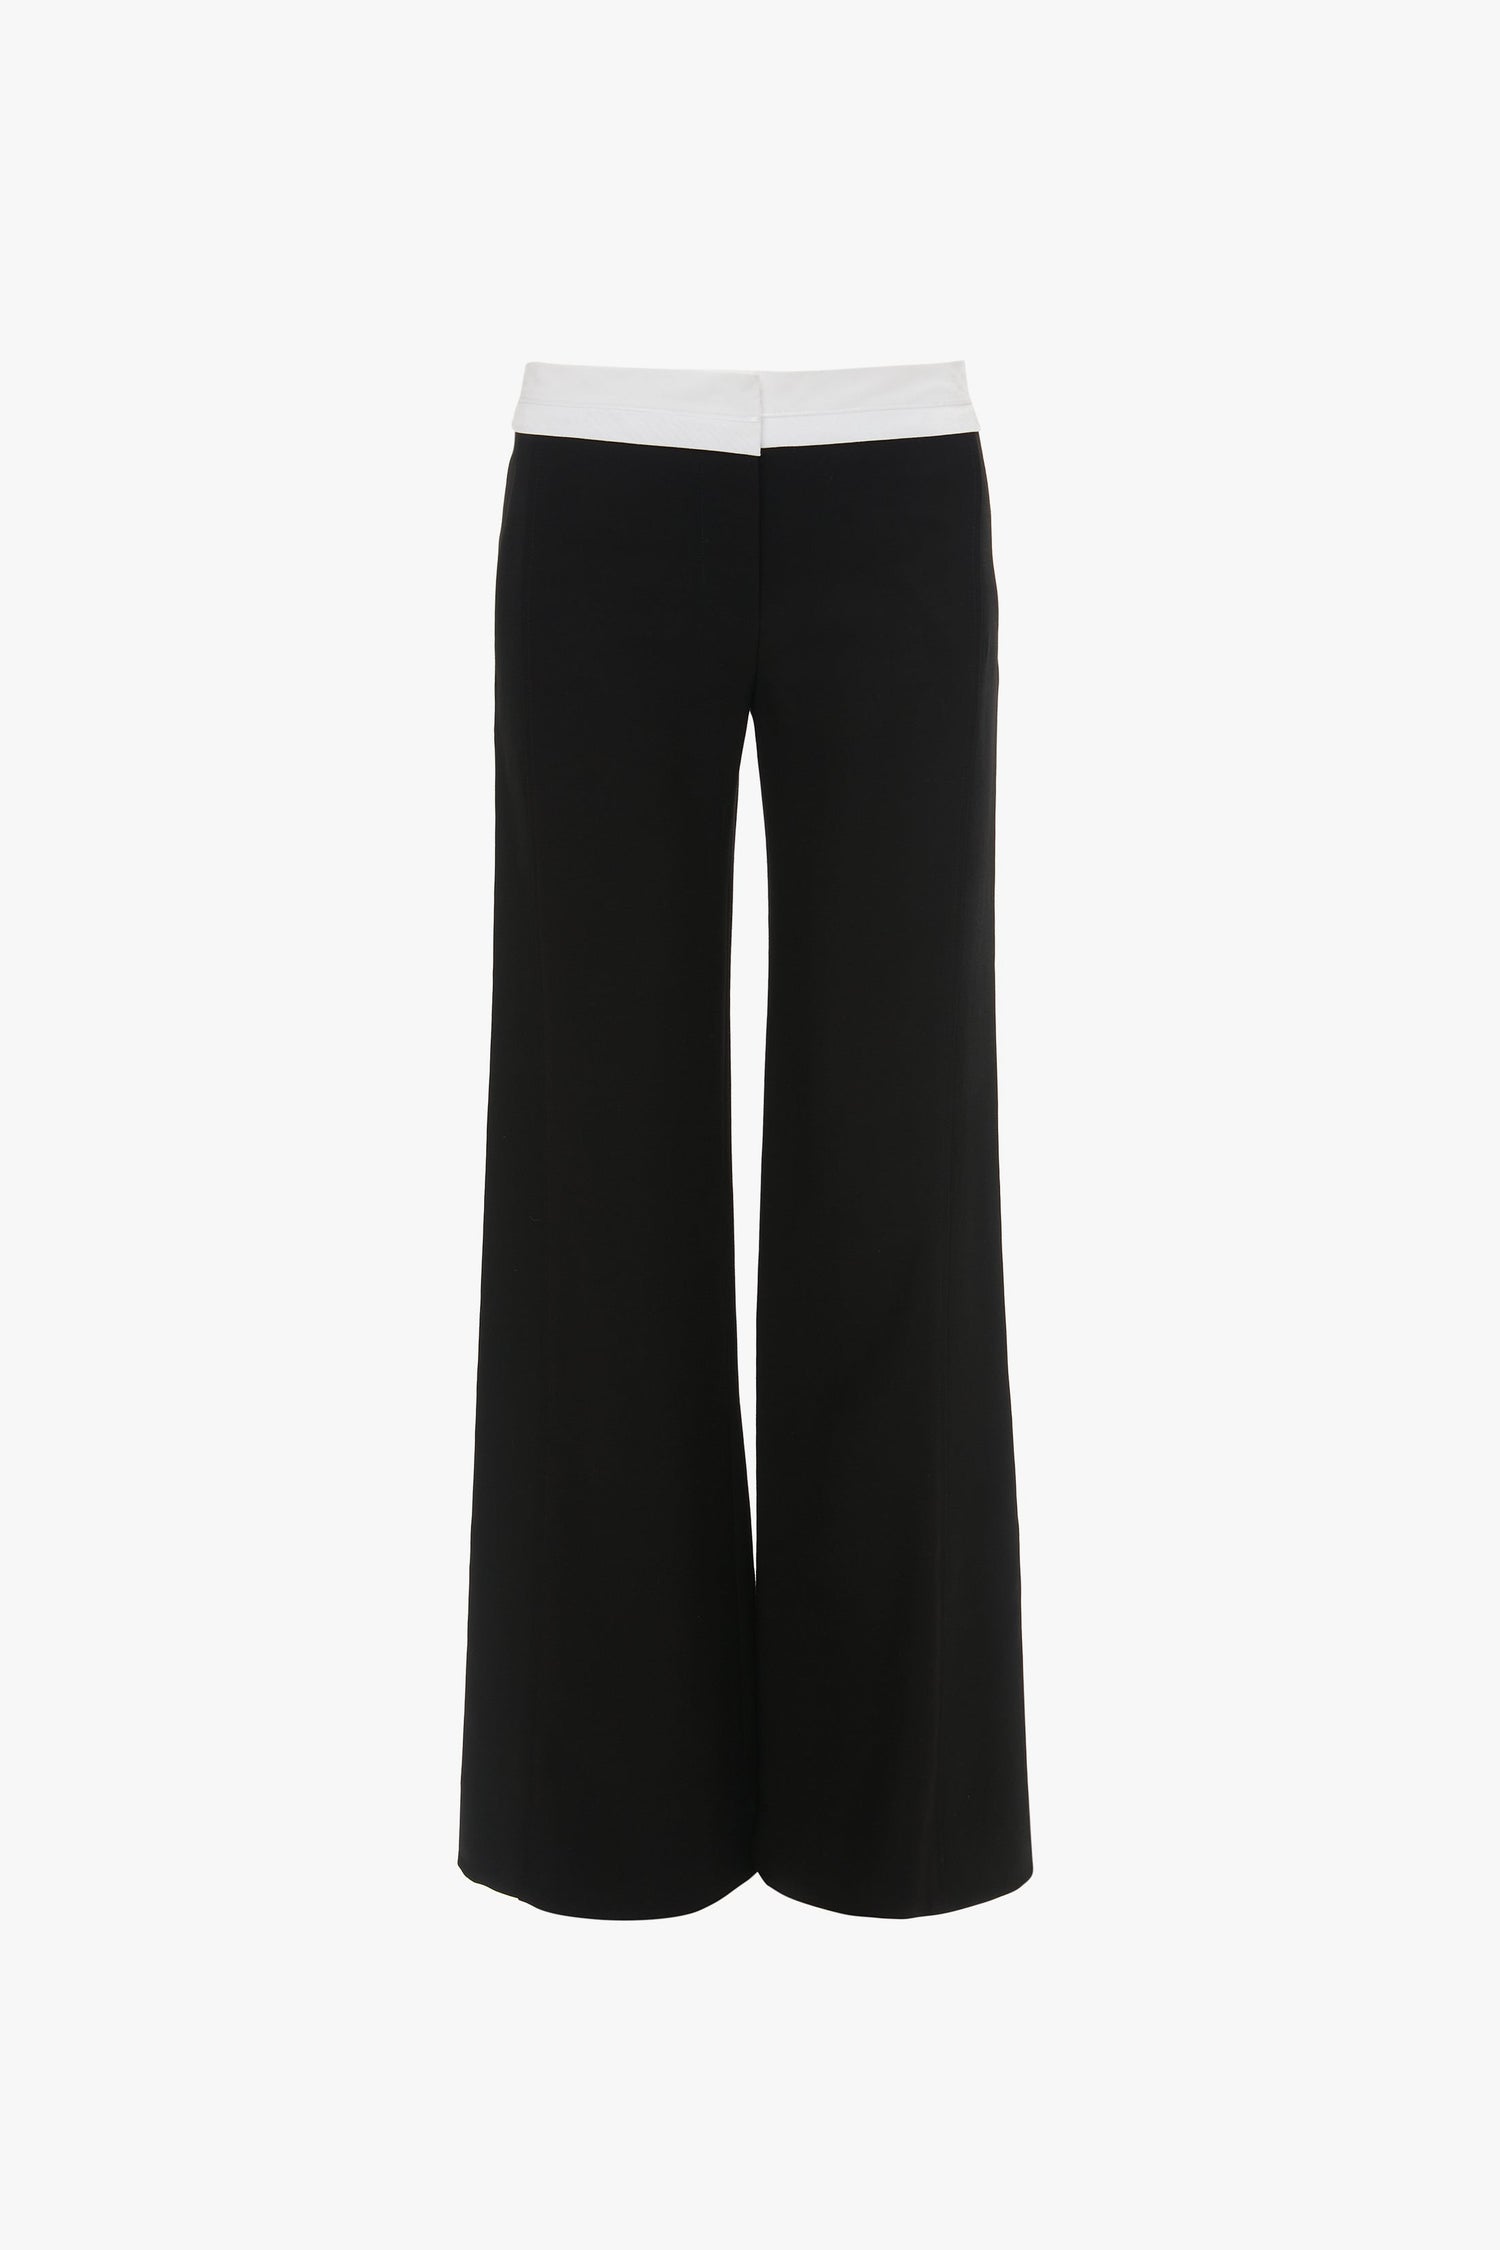 A pair of Victoria Beckham Side Panel Trouser In Black with a chic white waistband, viewed from the back.